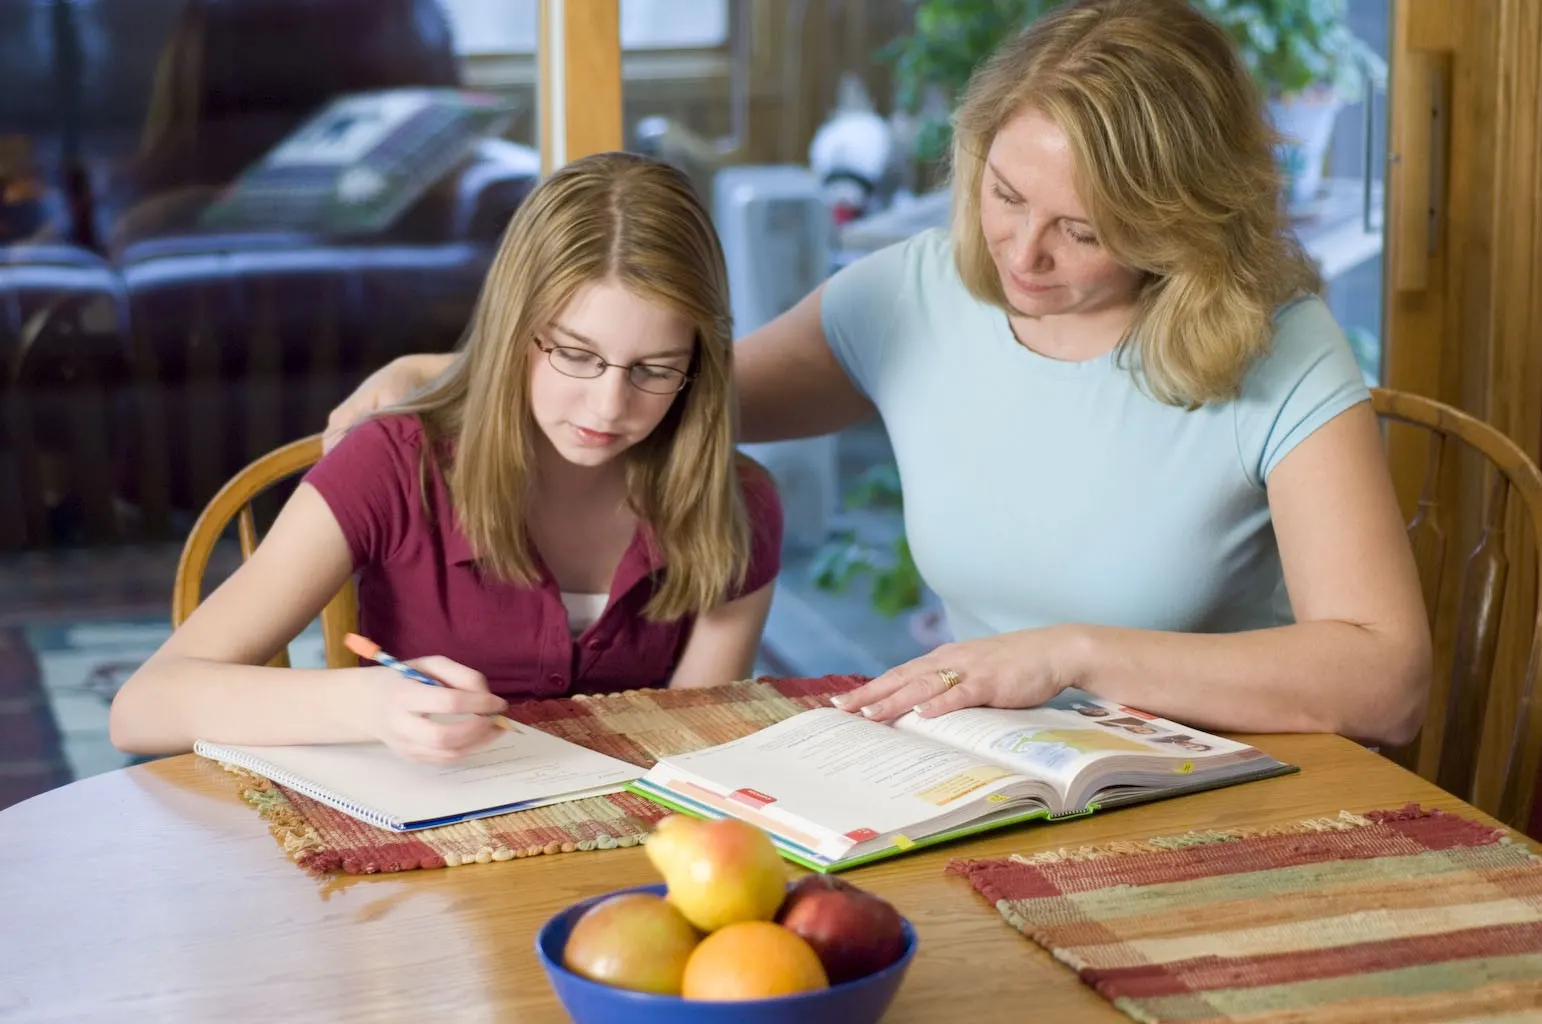 10 Things This Homeschooling Mom Does NOT Miss About Traditional School